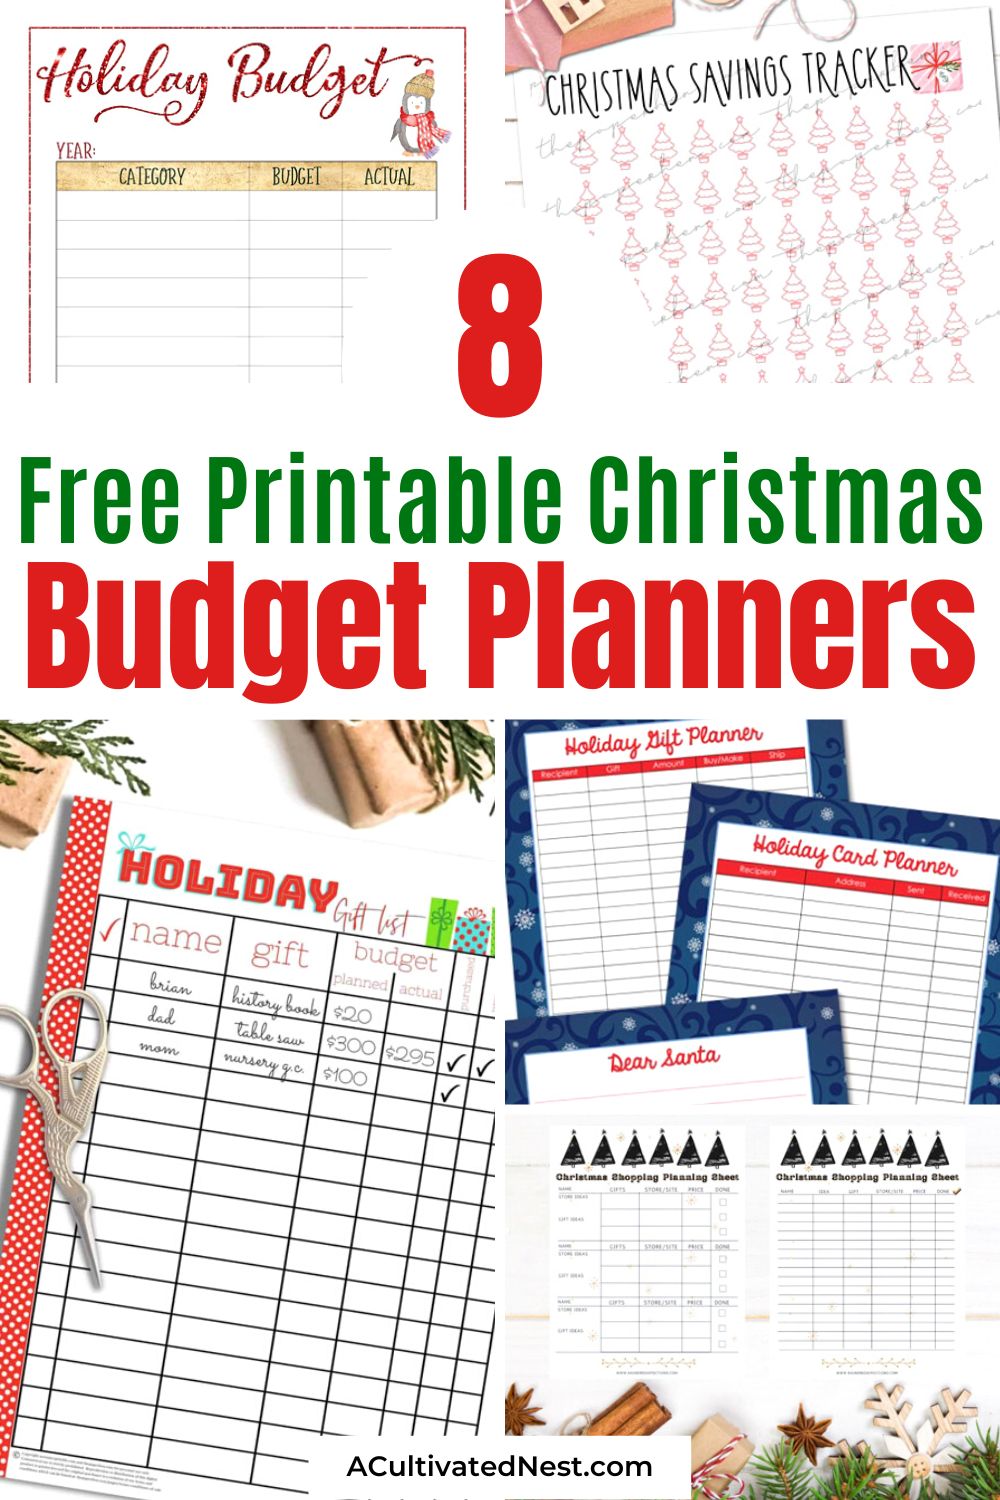 8 Free Printable Holiday Budget Planners- Budgeting for the holidays made easy! Explore the best in free printable planners with our collection of free printable holiday budget planners for a financially savvy Christmas. Download and get ready to sleigh the season! | #FreePrintables #HolidayBudgeting #ChristmasPlanning #plannerPrintables #ACultivatedNest